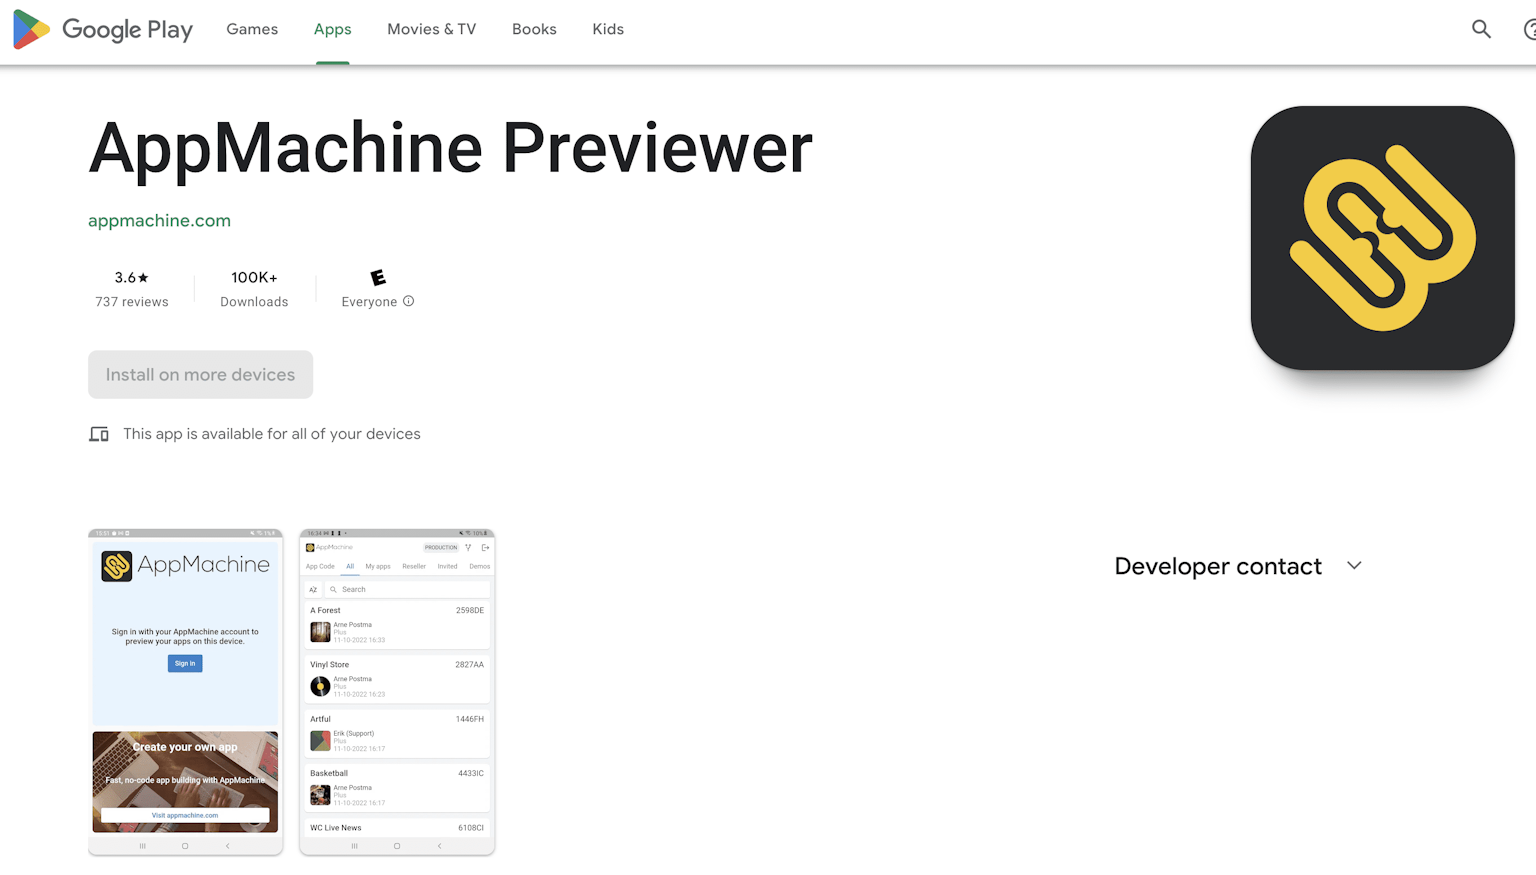 AppMachine Previewer in the Google Play Store